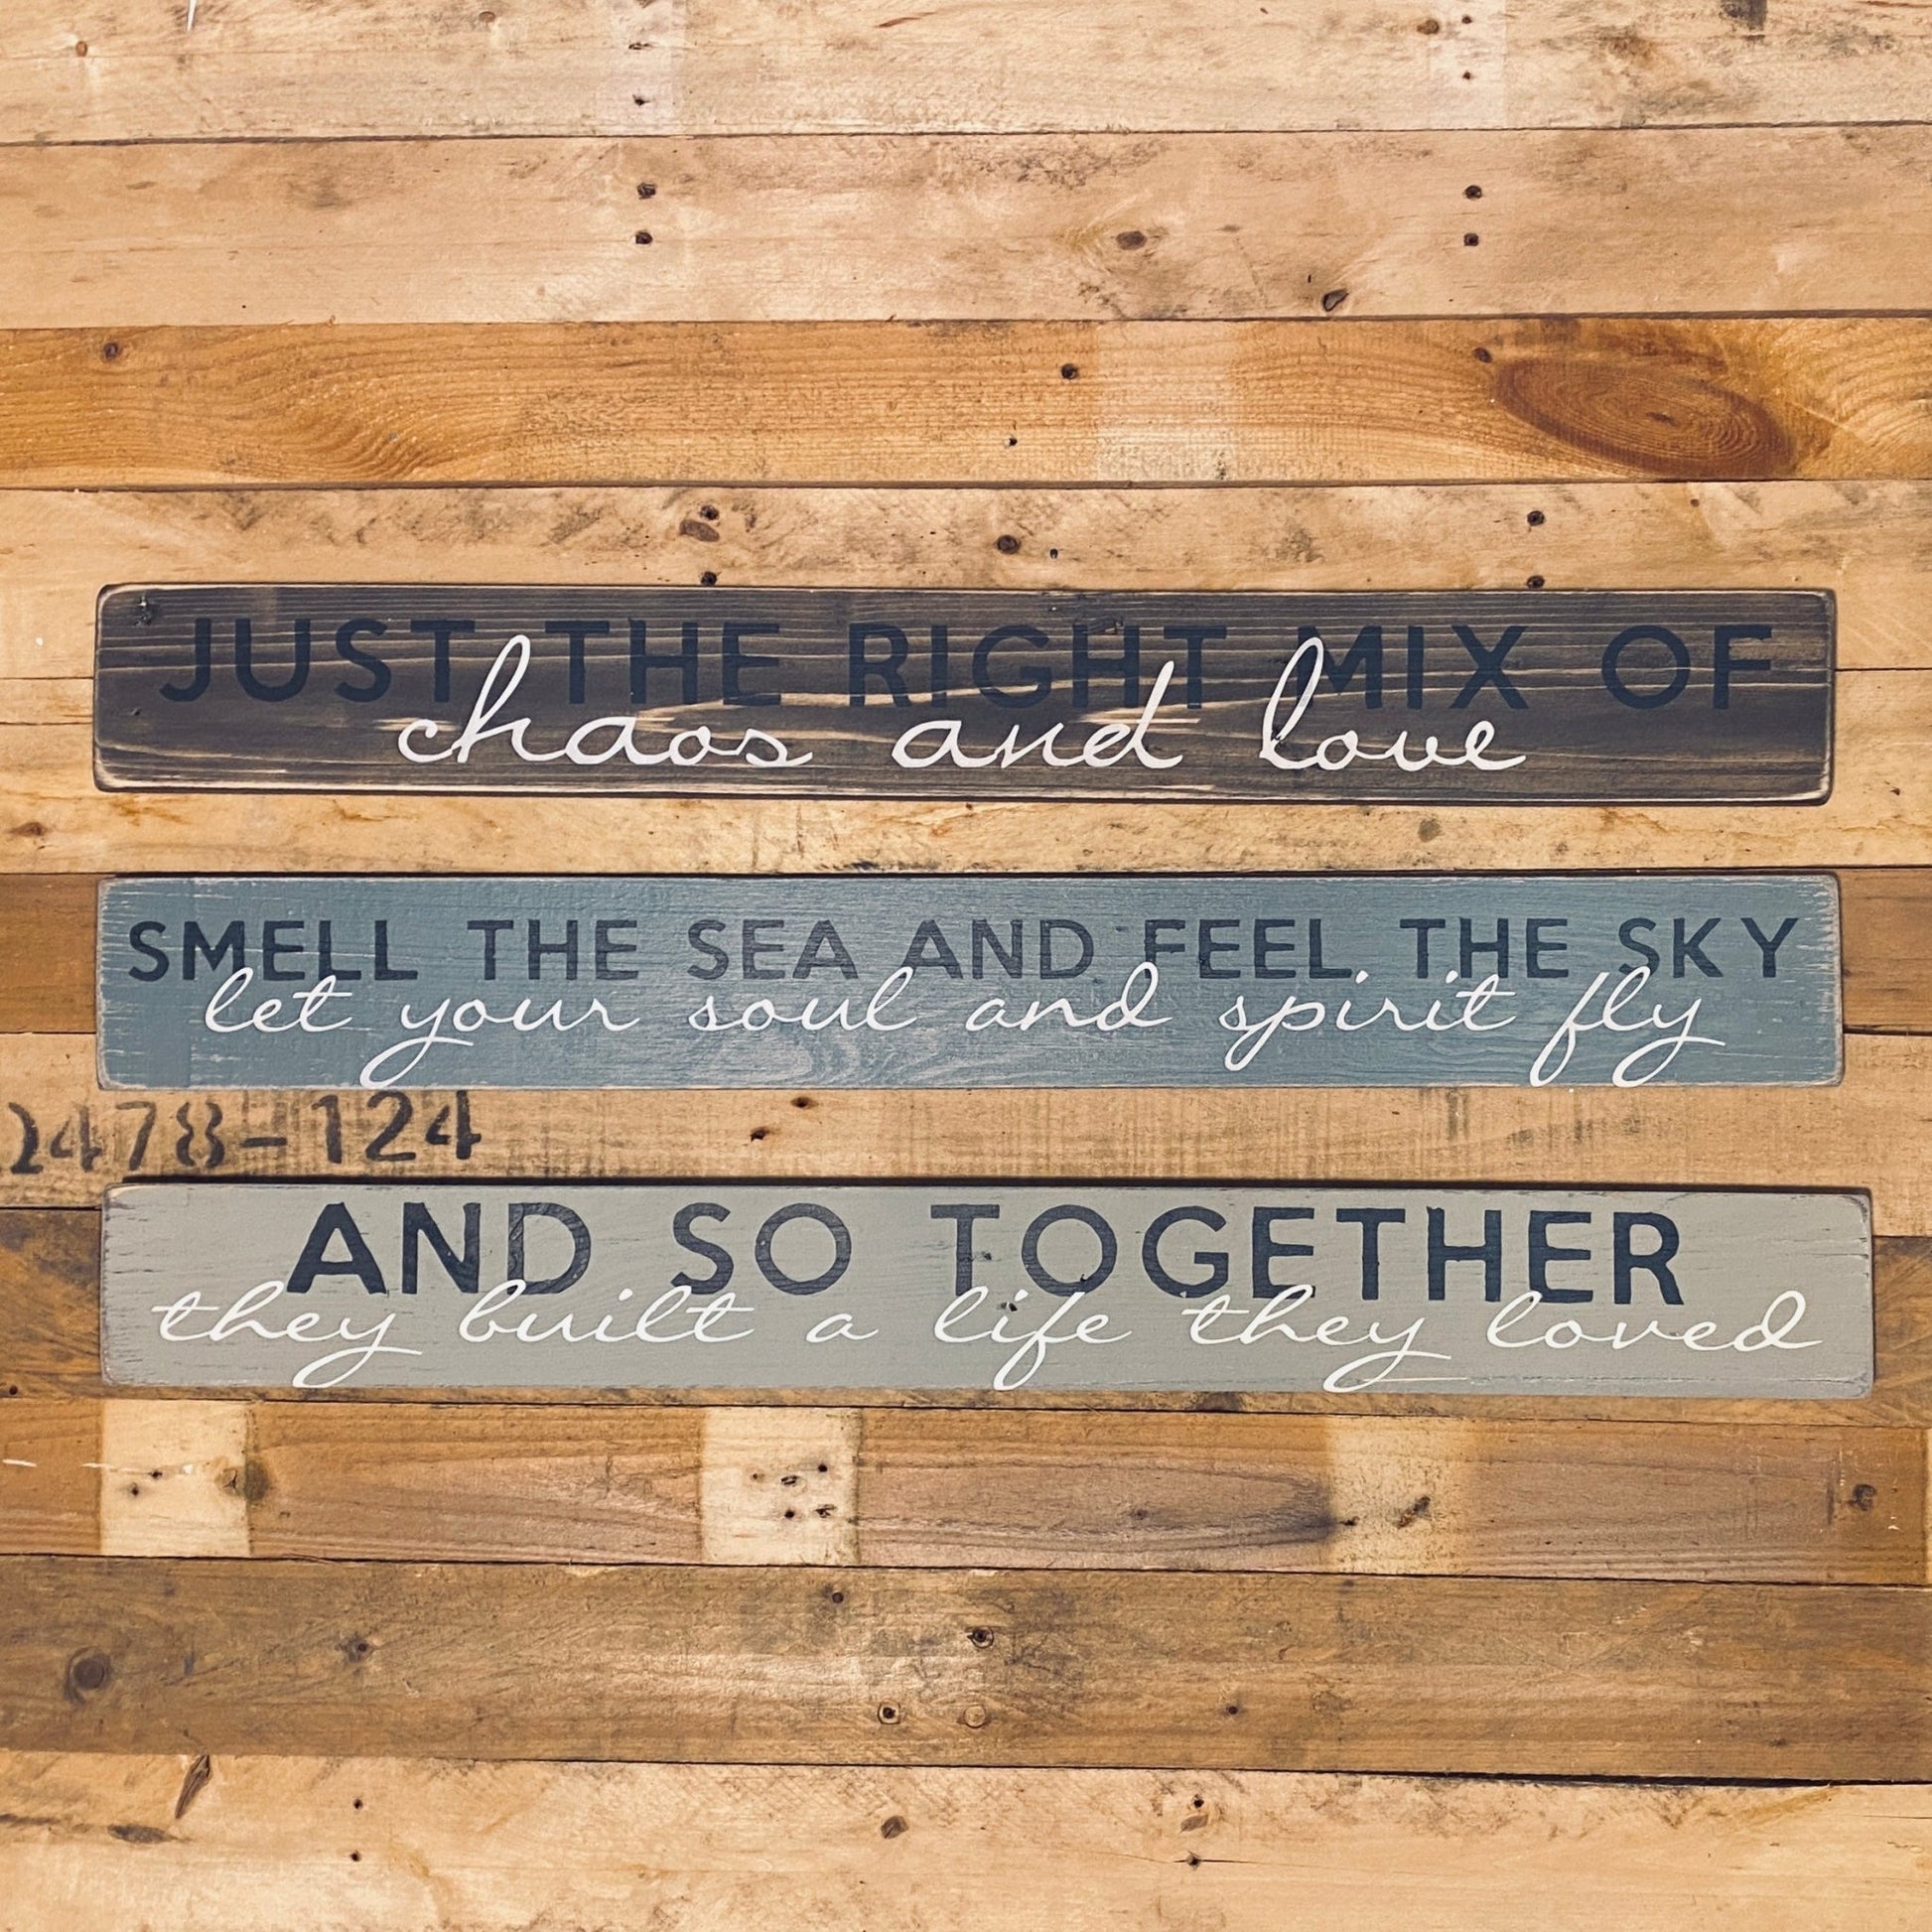 Just The Right Mix.... | Long Wood Sign - The Imperfect Wood Company - Long Wood Sign